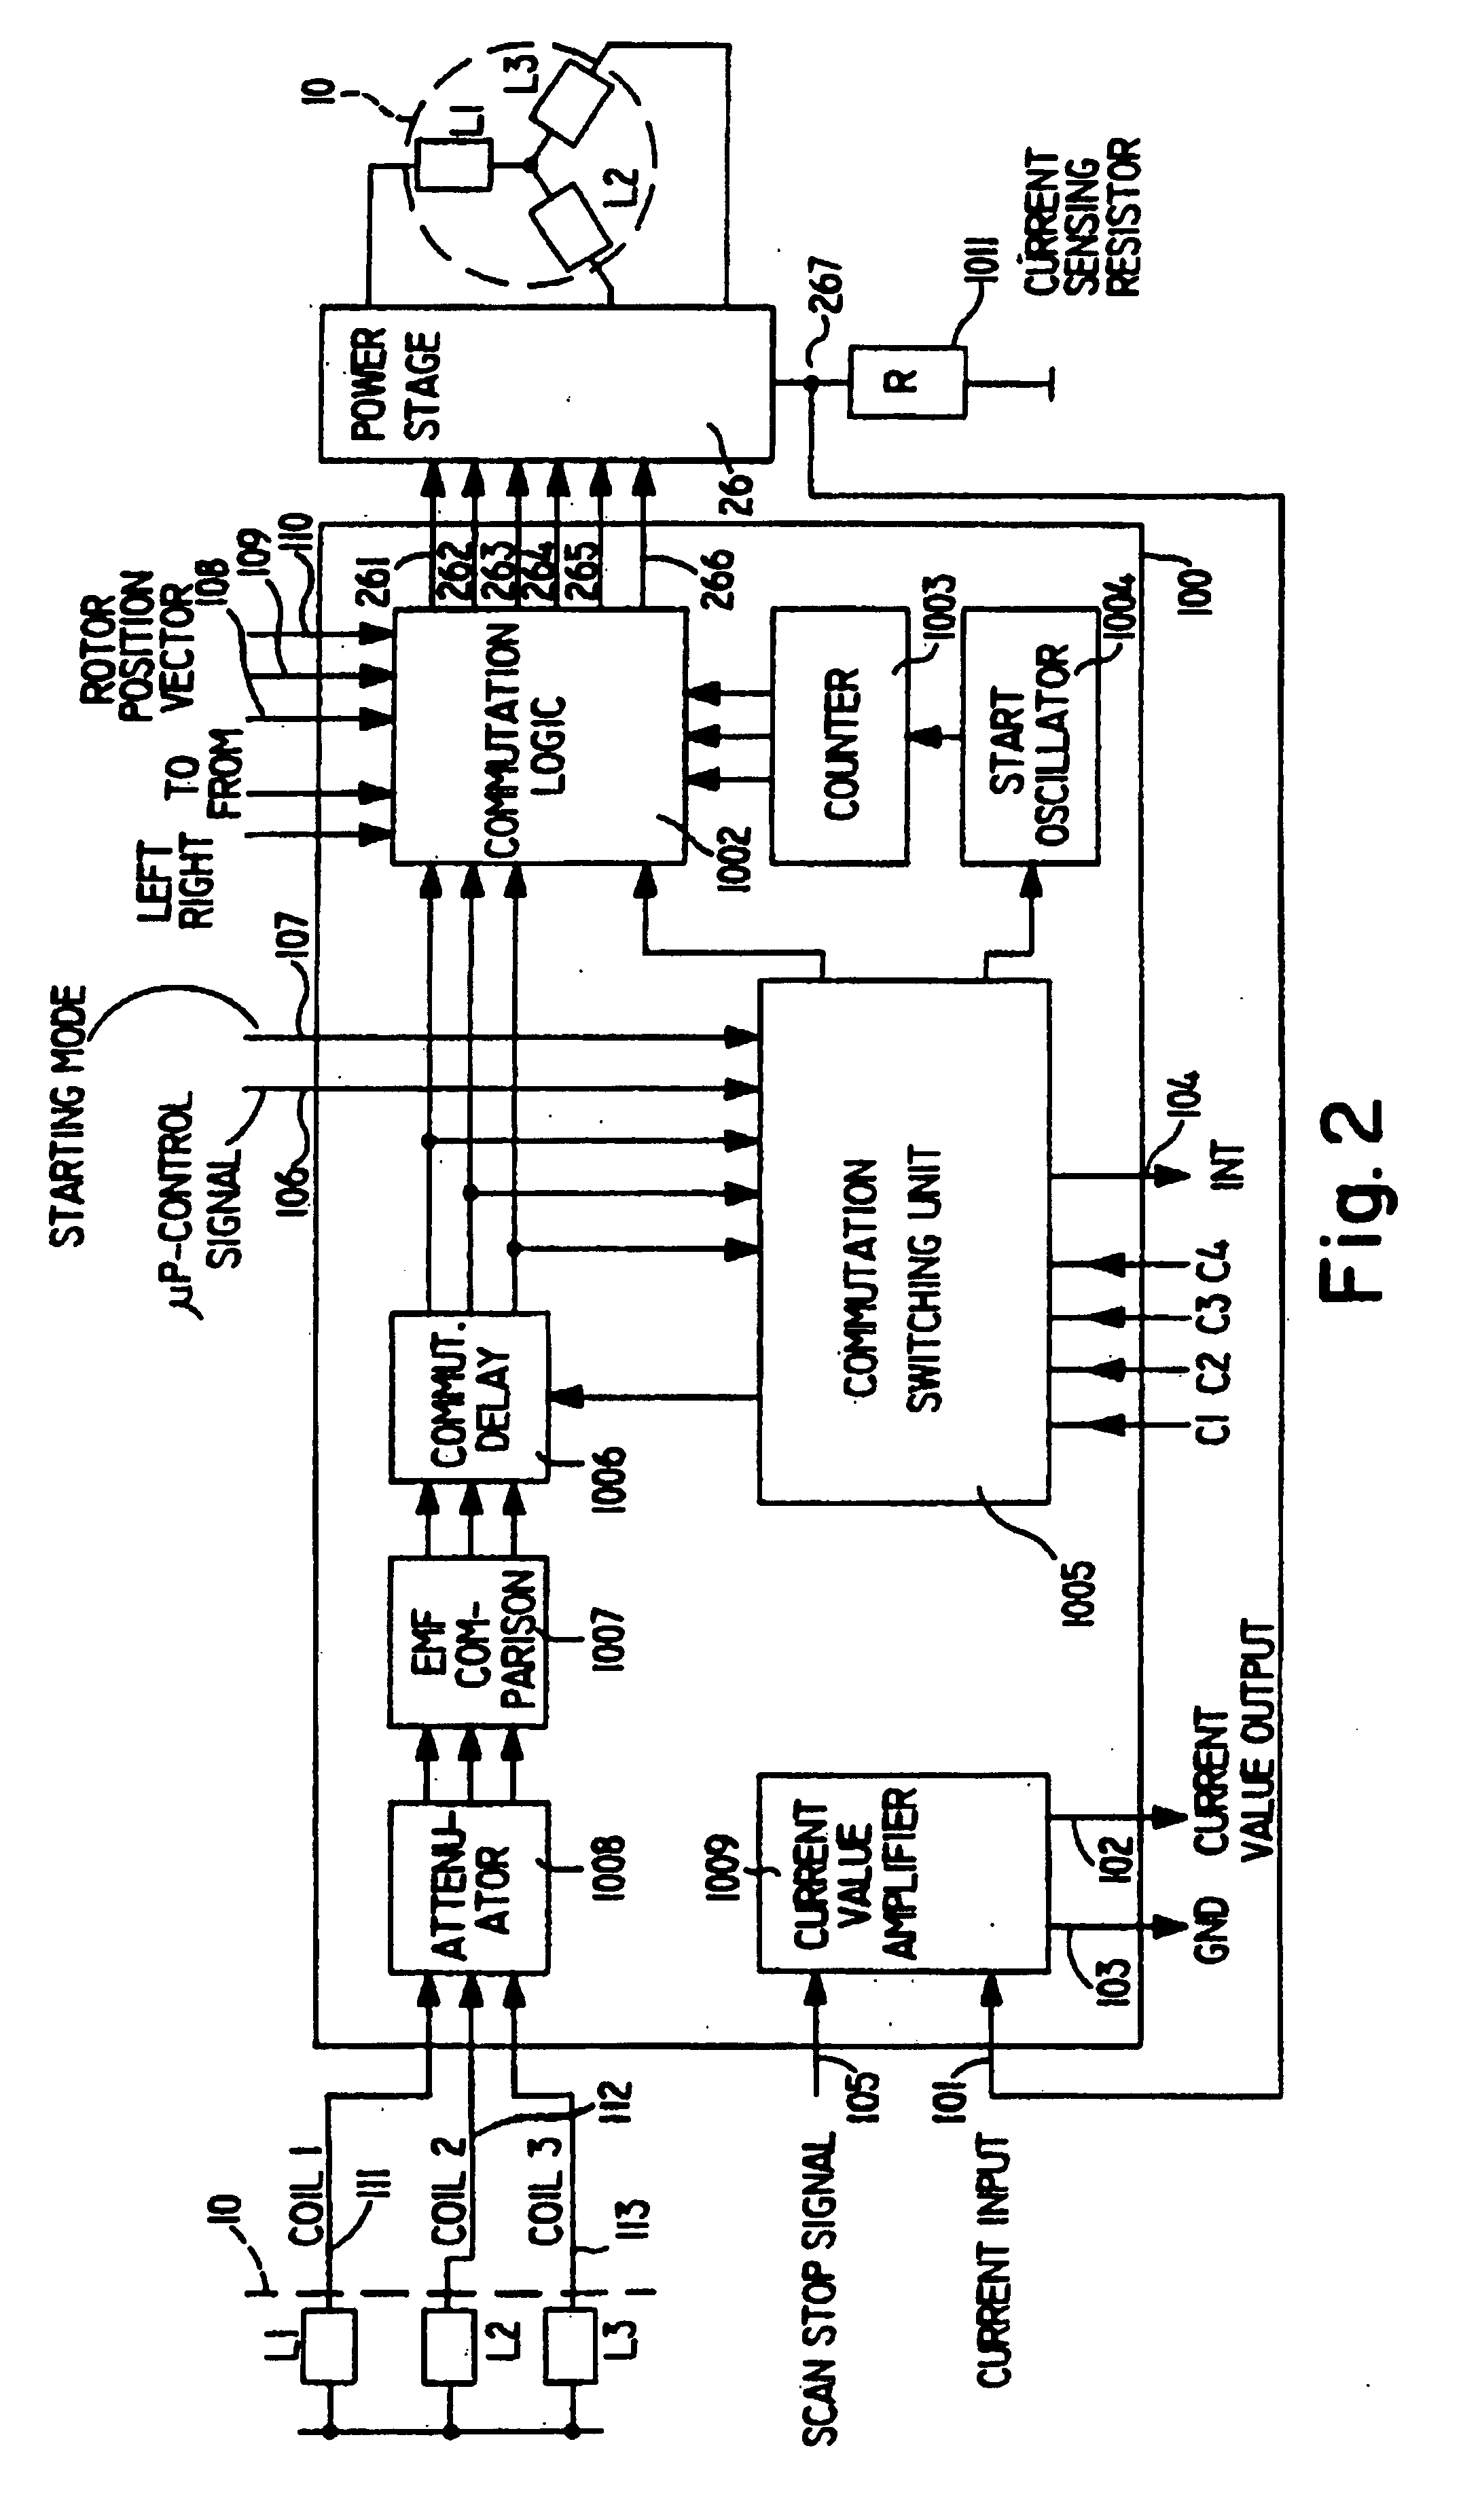 Apparatus and method for controlling brushless electric motors and position encoders and indicating position thereof